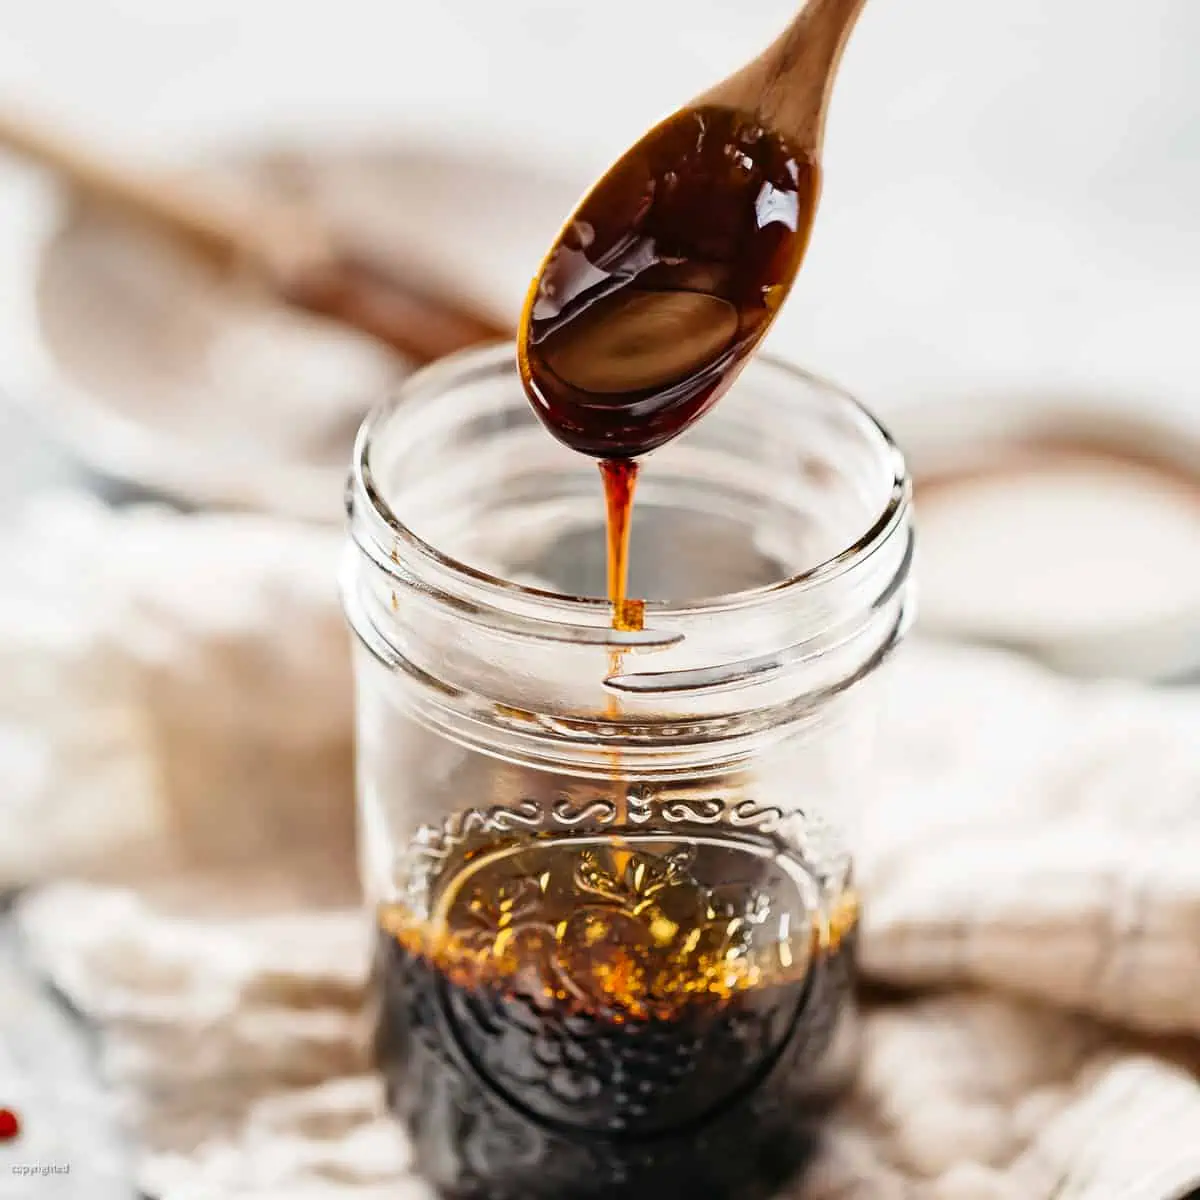 Unagi sauce in a glass jar with a wooden spoon